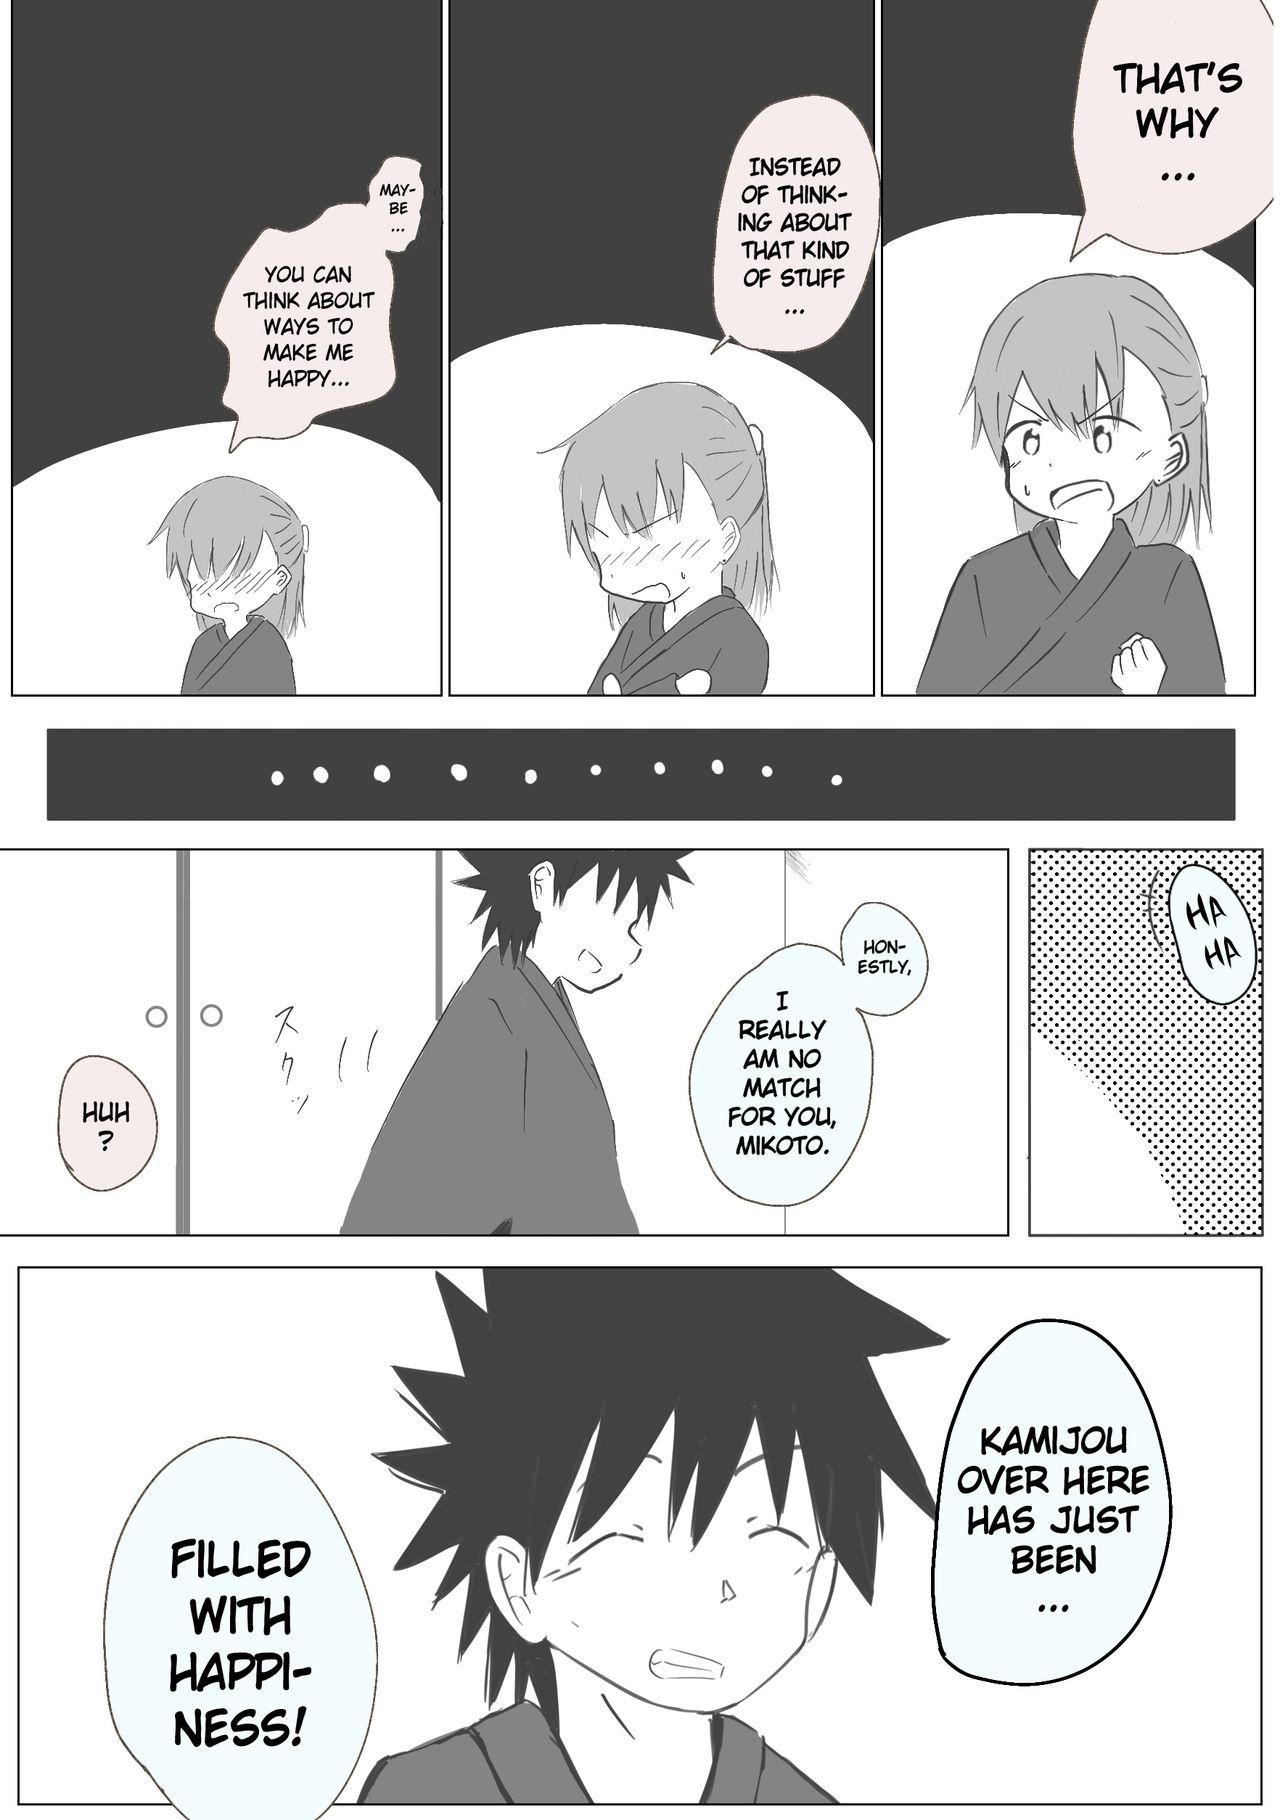 Prostituta Kamikoto's First Night as Newlyweds - Toaru majutsu no index | a certain magical index Spying - Page 5